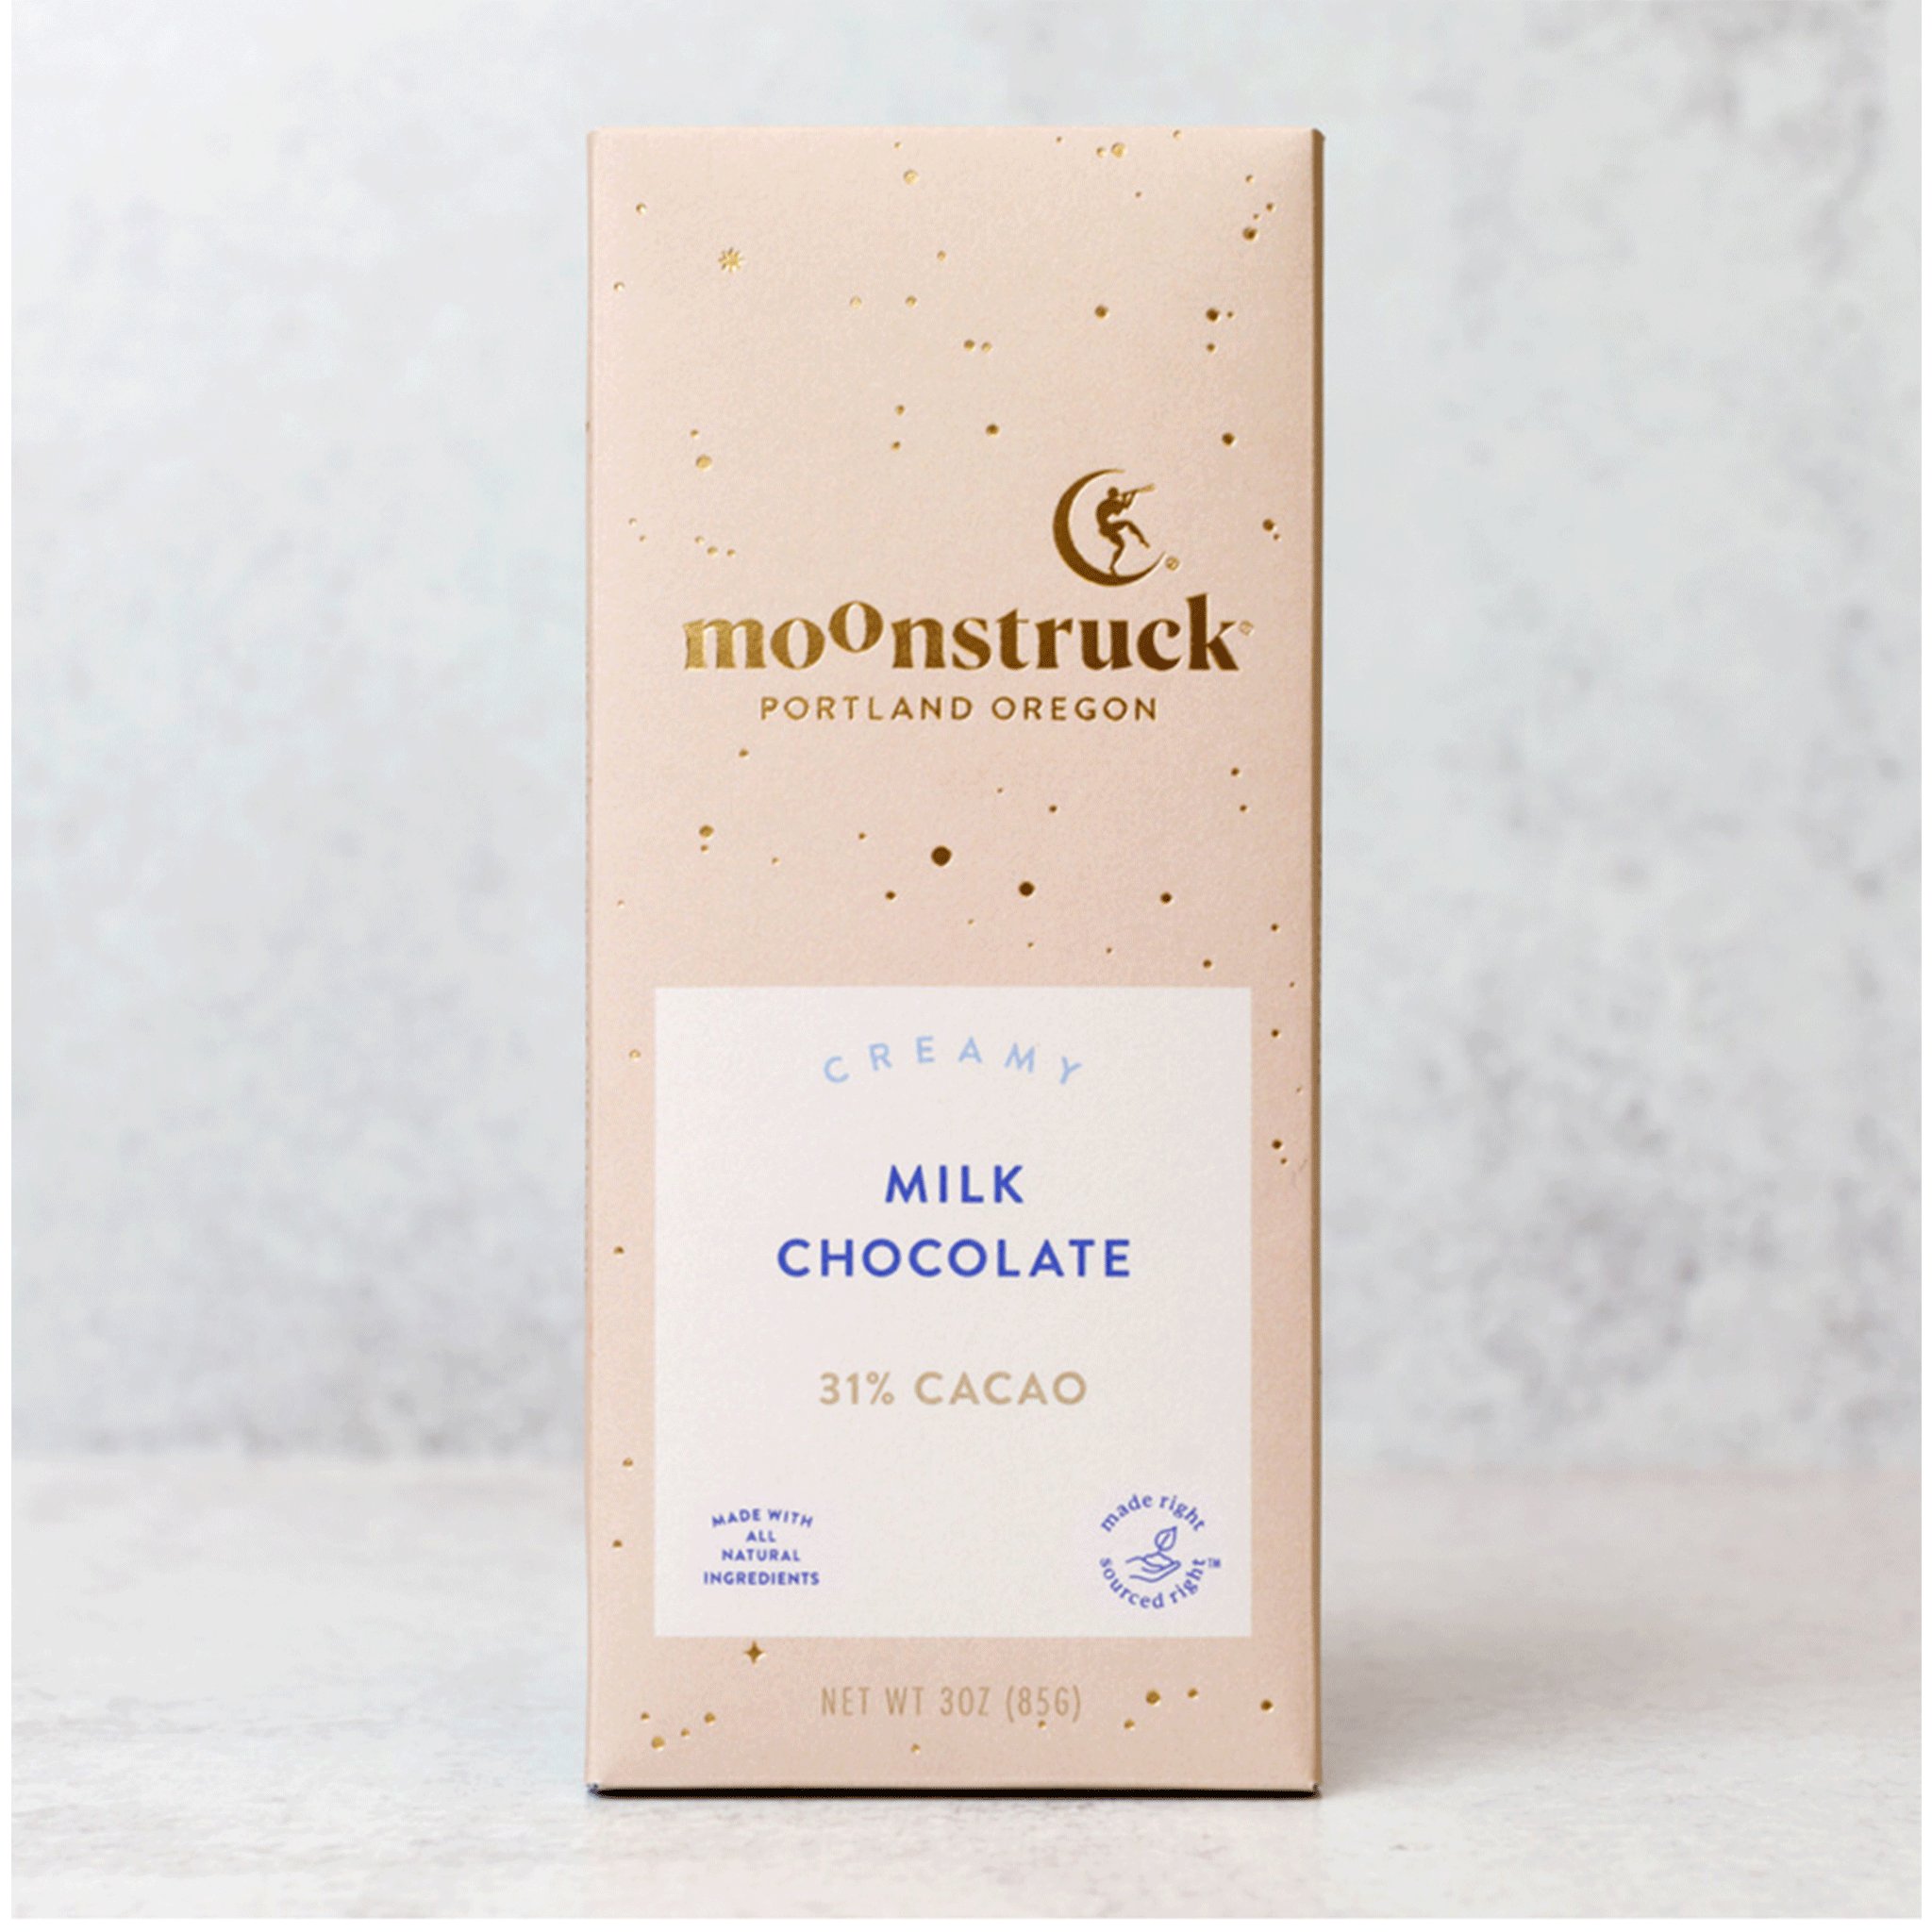 On a grey background is a tan packaged chocolate bar with gold details and text that reads, &quot;moonstruck Portland Oregon&quot;, &quot;Creamy Milk Chocolate 31% Cacao&quot;.